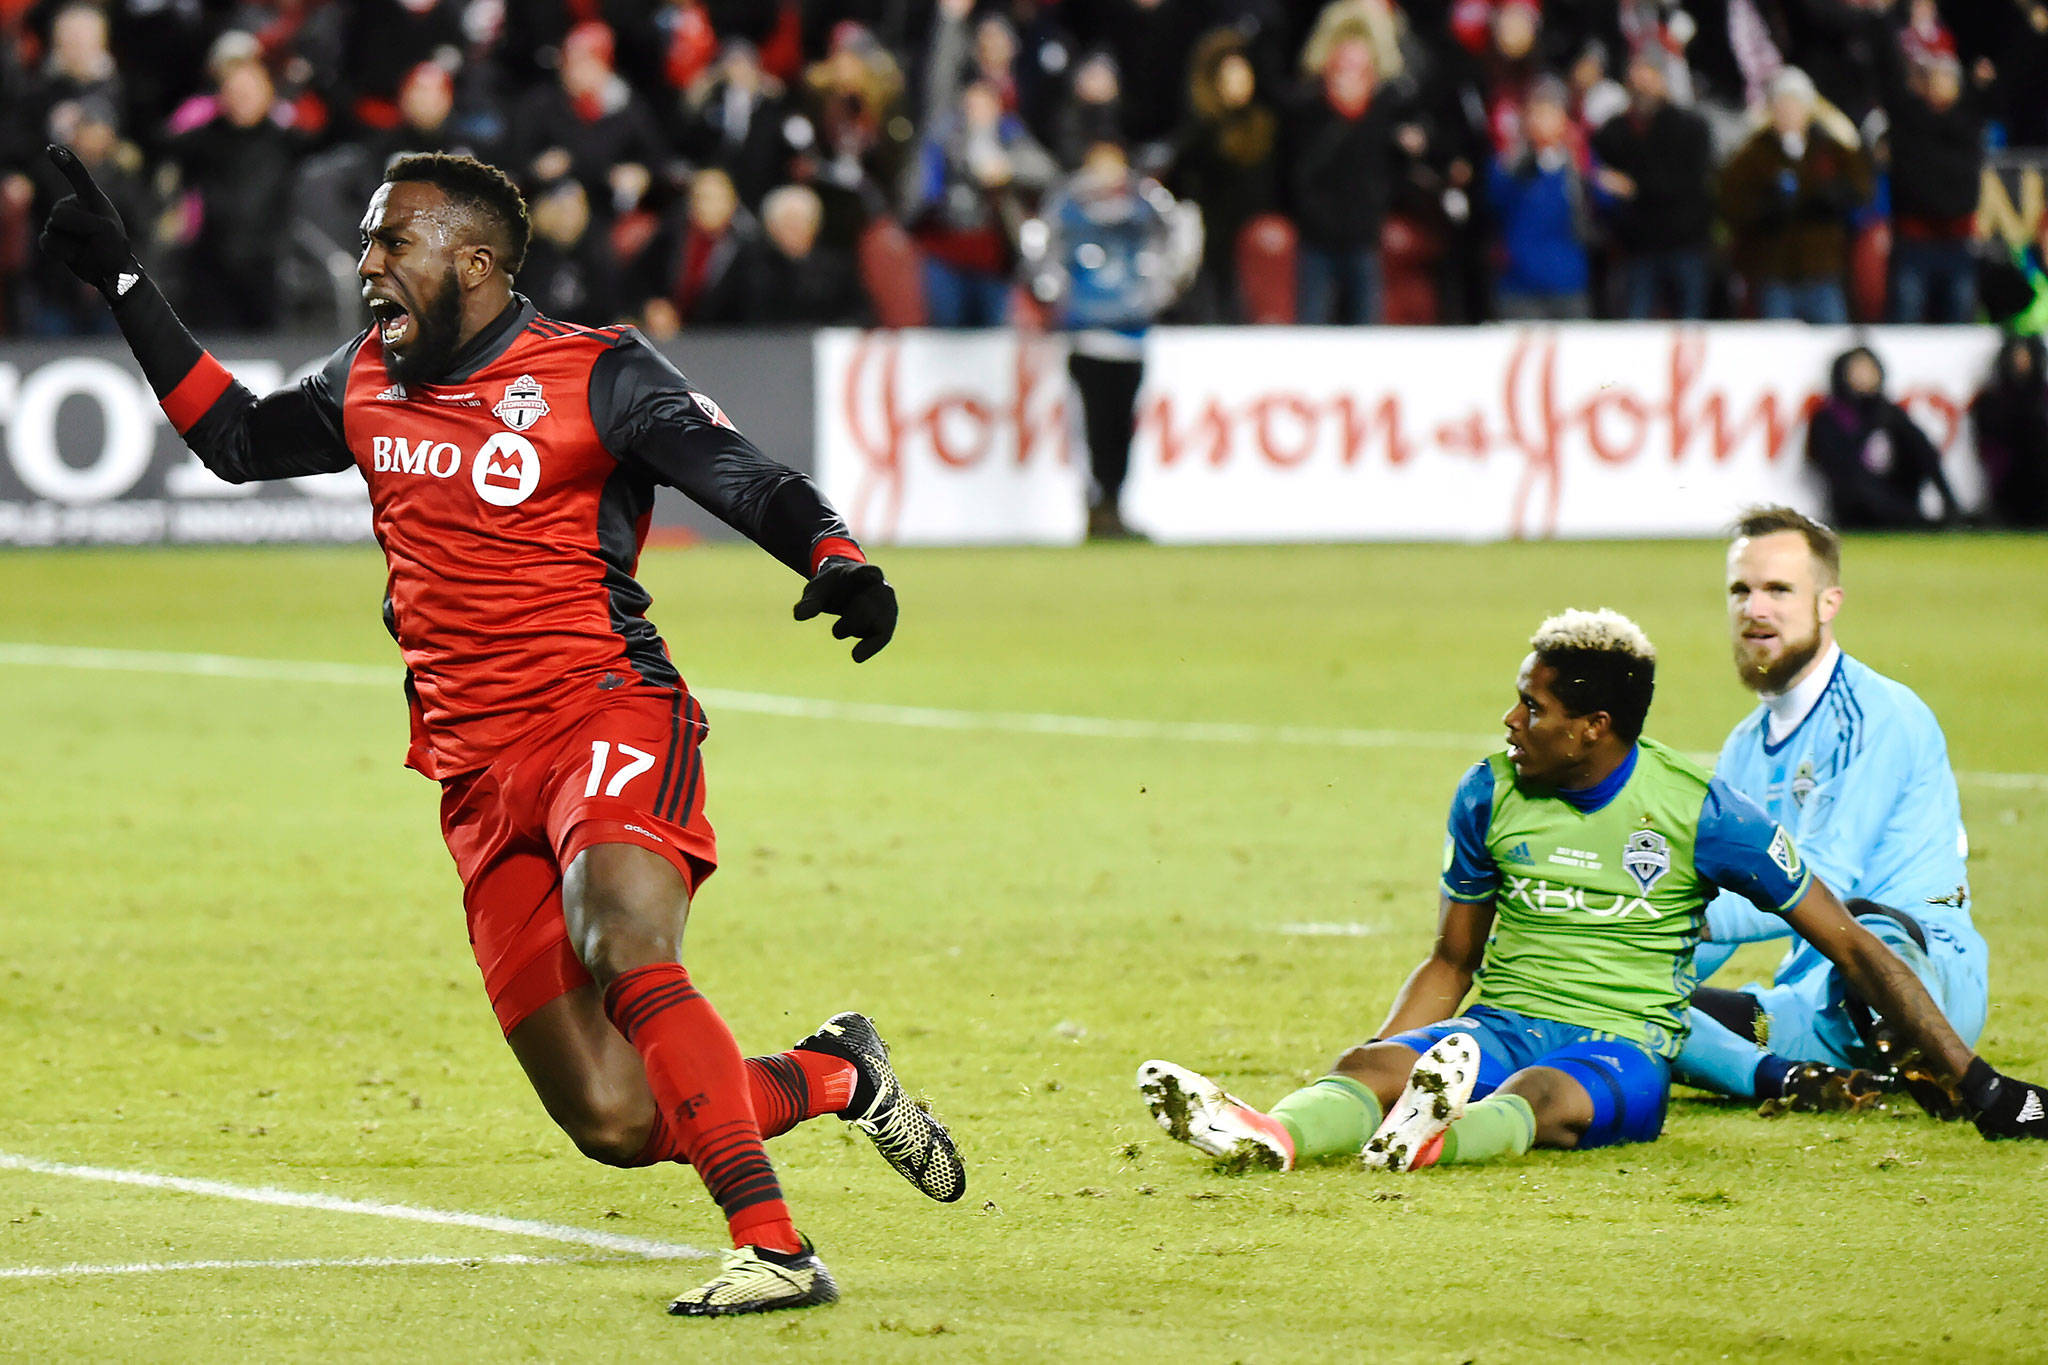 Toronto FC forward Jozy Altidore (17) celebrates after scoring against Sounders goalkeeper Stefan Frei (right) as defender Joevin Jones looks on during the second half of the MLS Cup final on Dec. 9, 2017, in Toronto. (Nathan Denette/The Canadian Press)